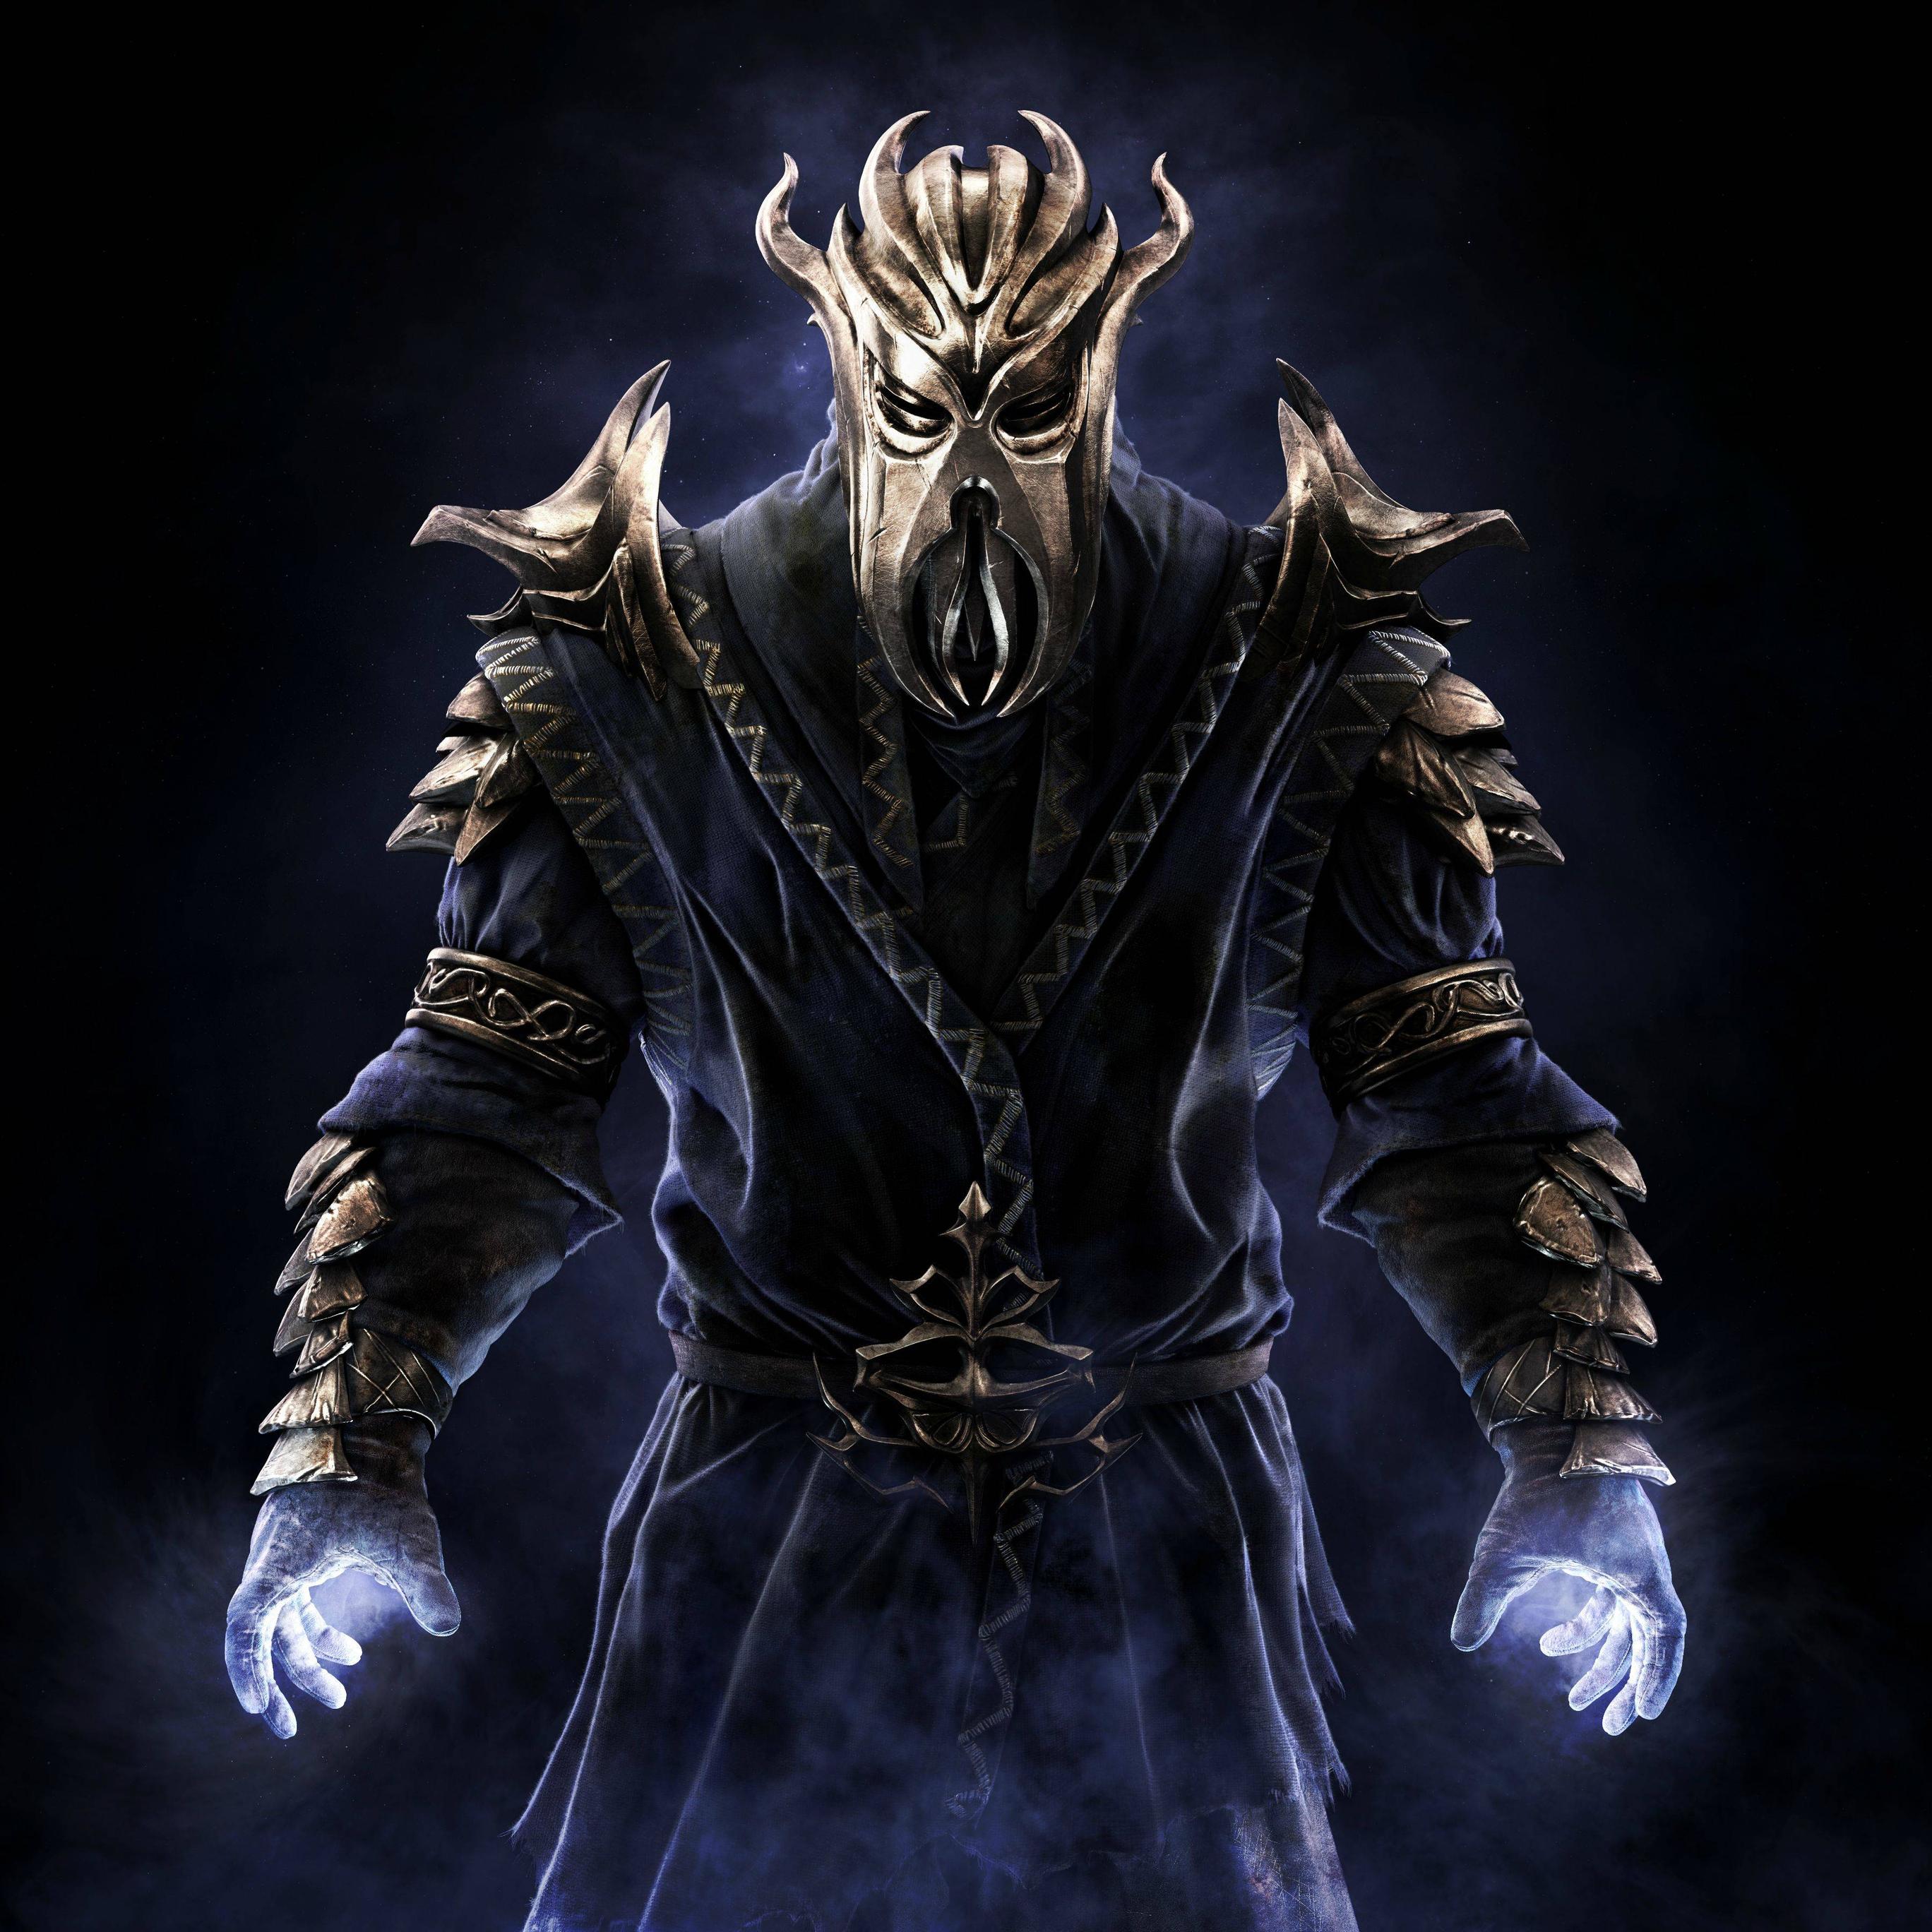 The First Dragonborn from Skyrim